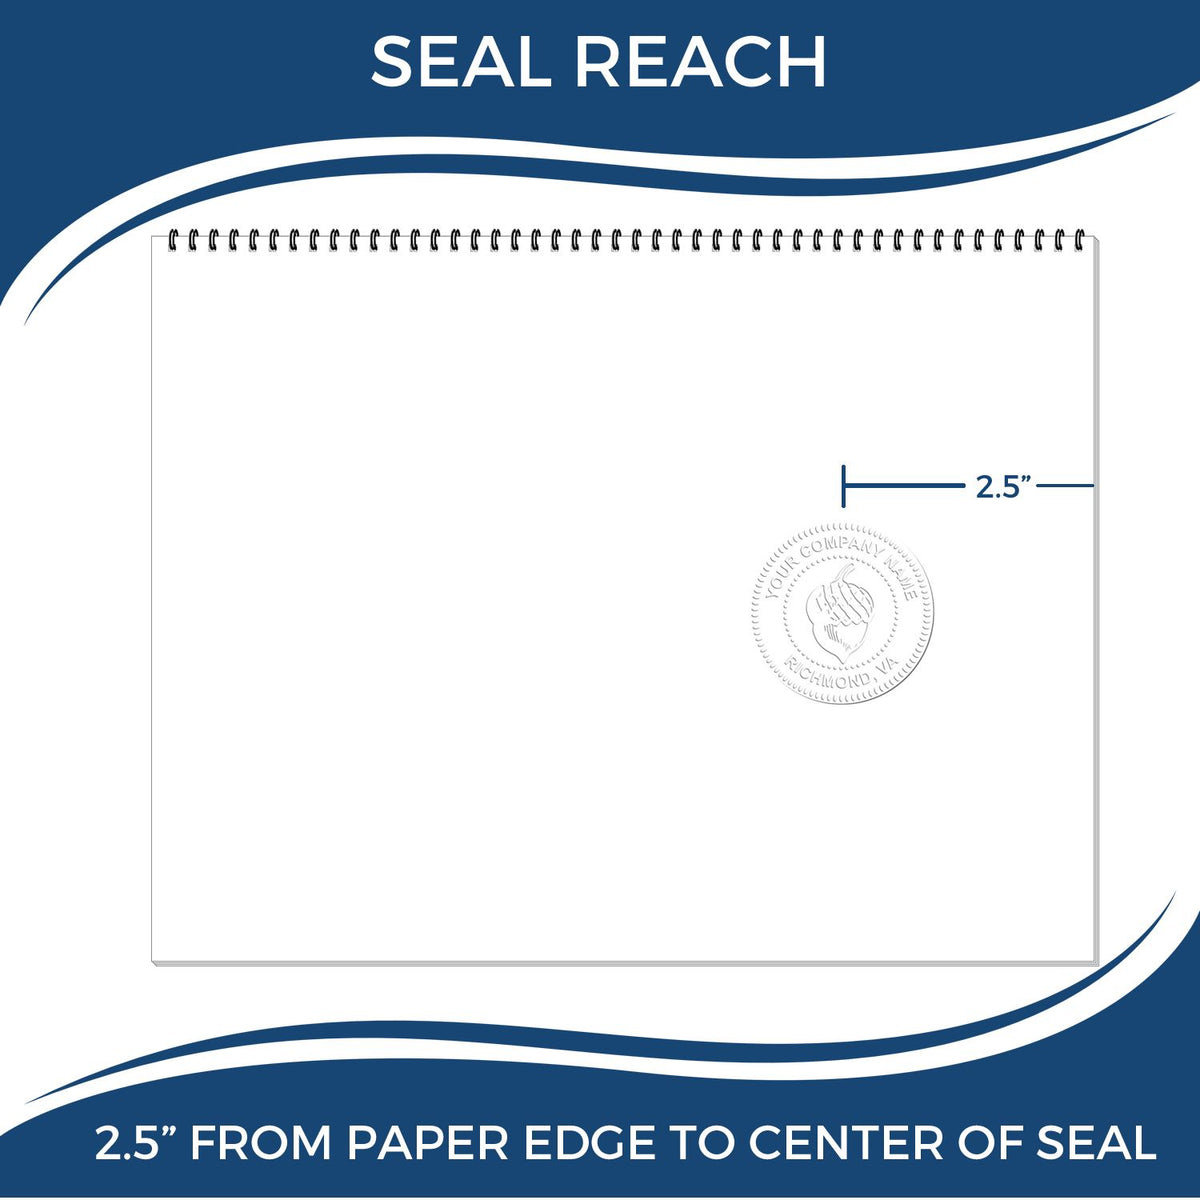 An infographic showing the seal reach which is represented by a ruler and a miniature seal image of the Heavy Duty Cast Iron Pennsylvania Engineer Seal Embosser